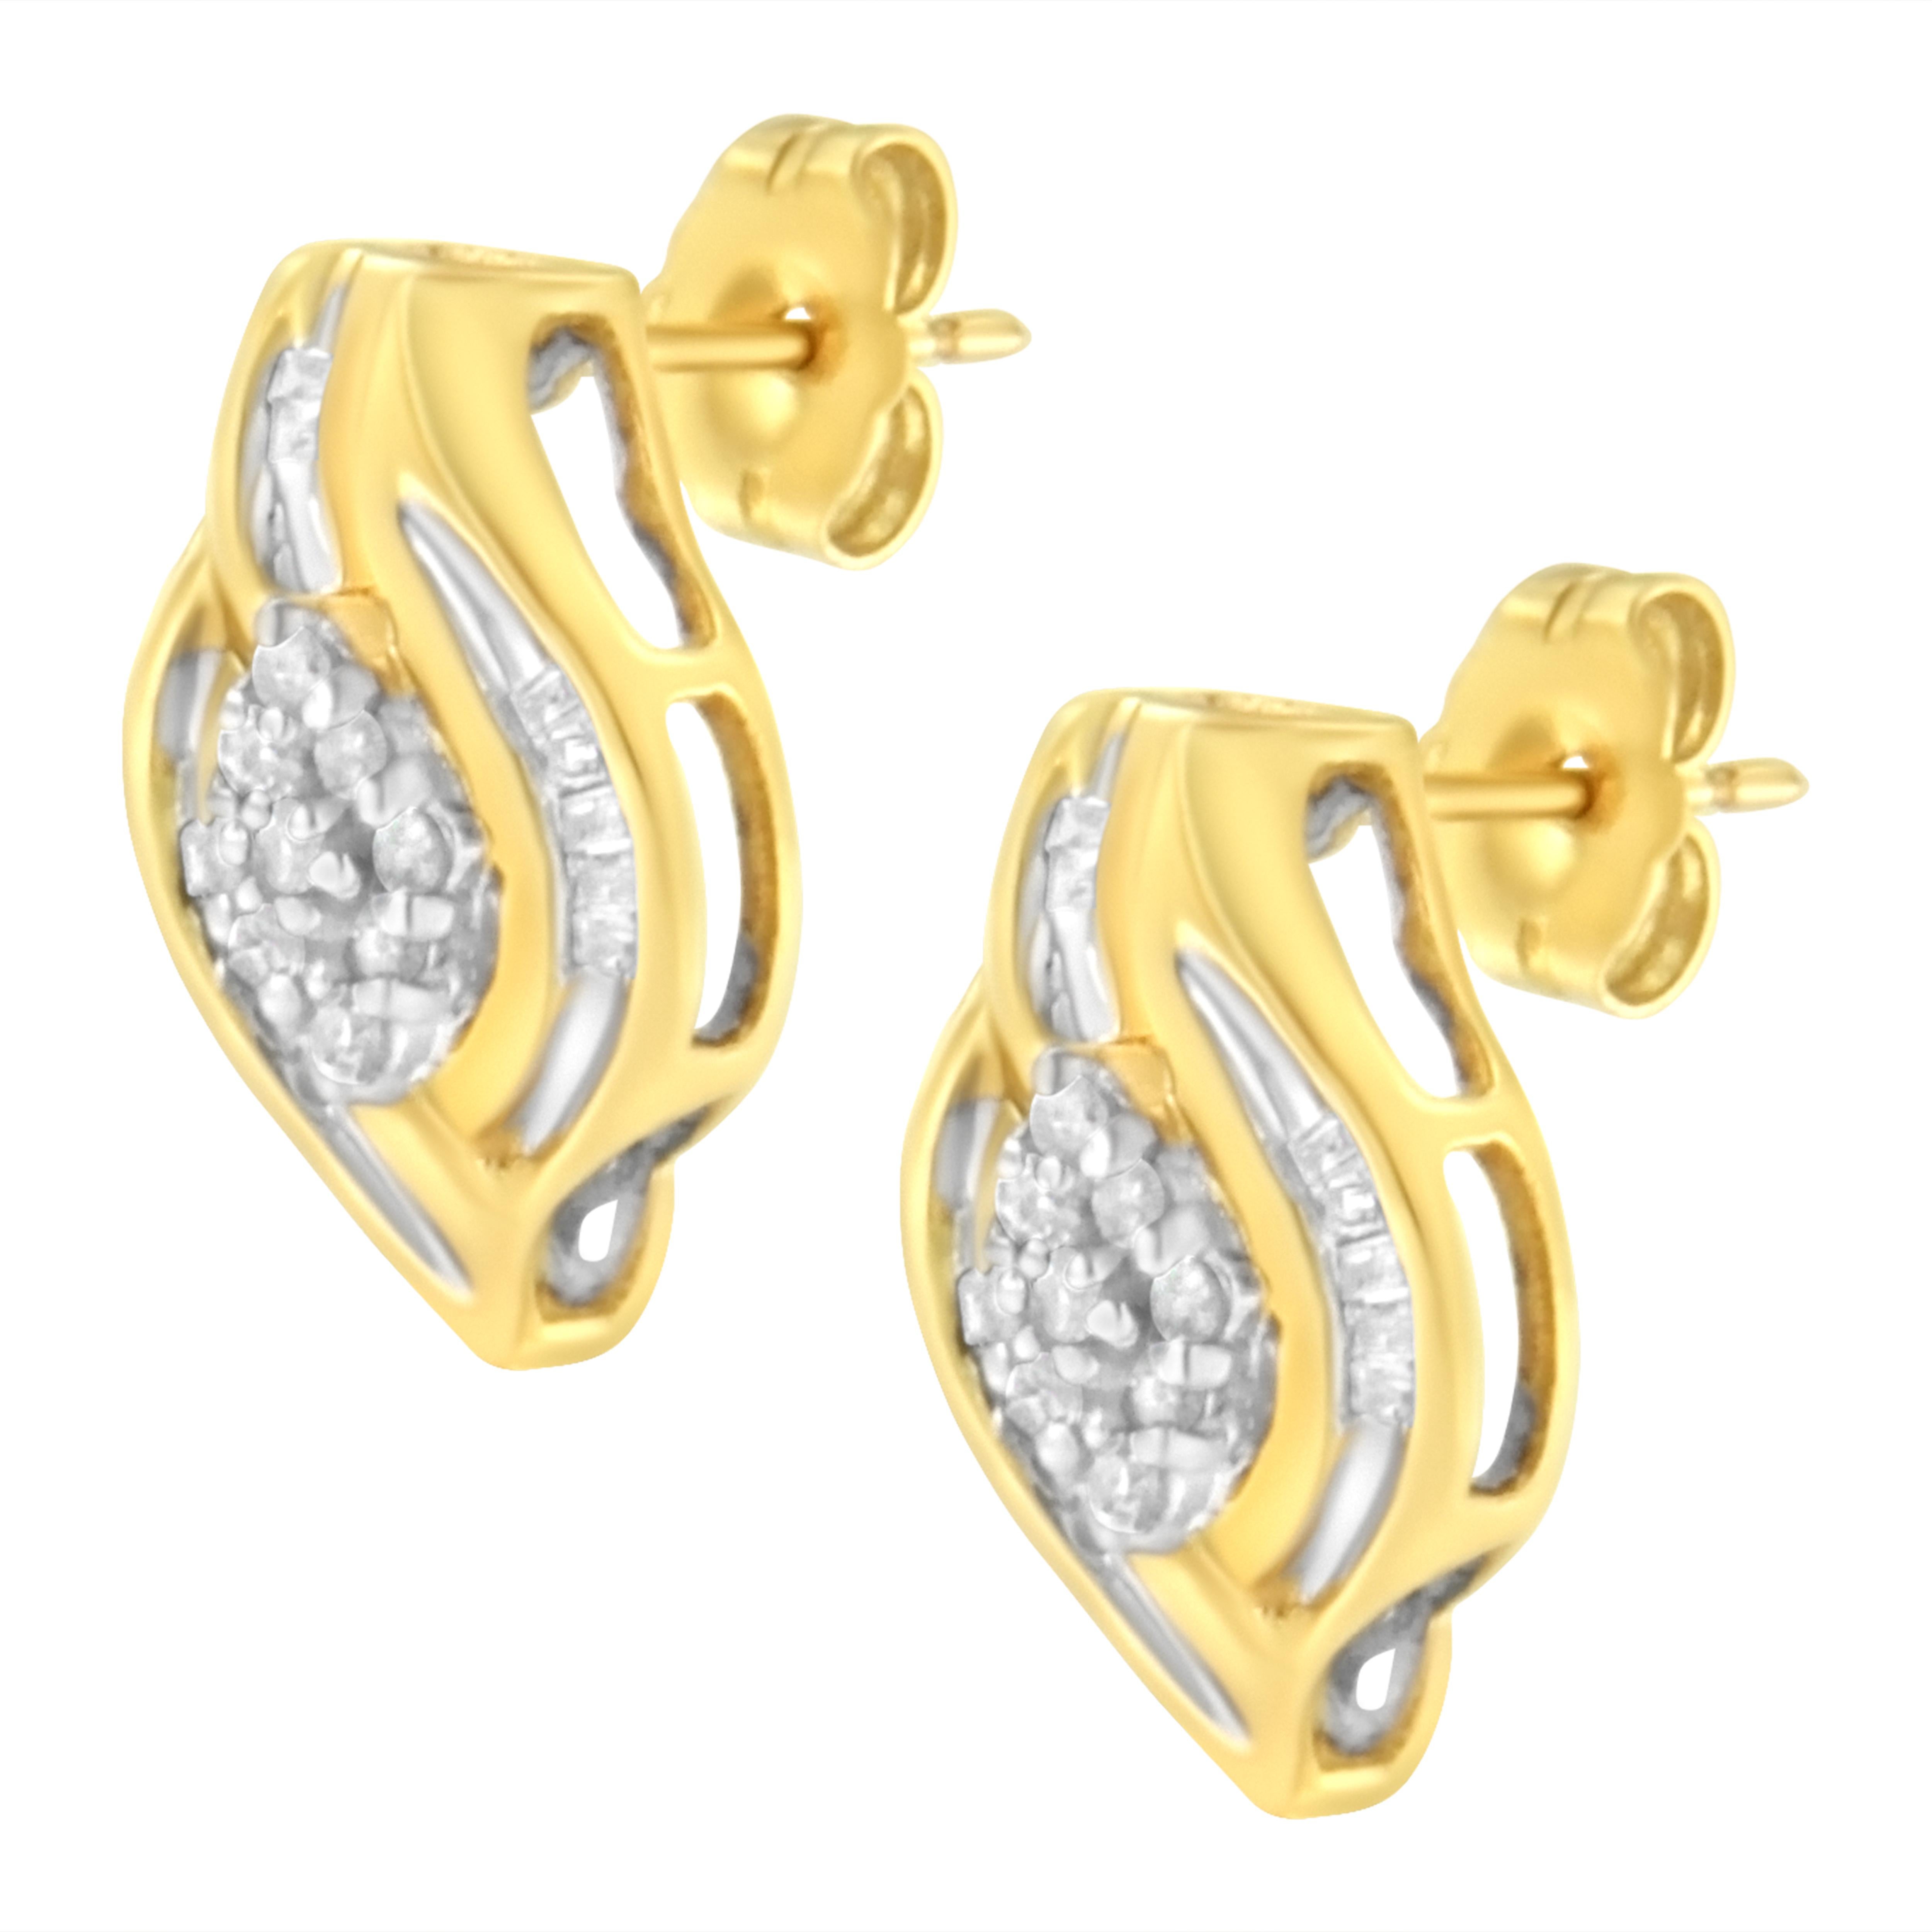 10K Yellow Gold 1/3 Carat Round-Cut Diamond Cluster and Swirl Stud Earrings In New Condition For Sale In New York, NY